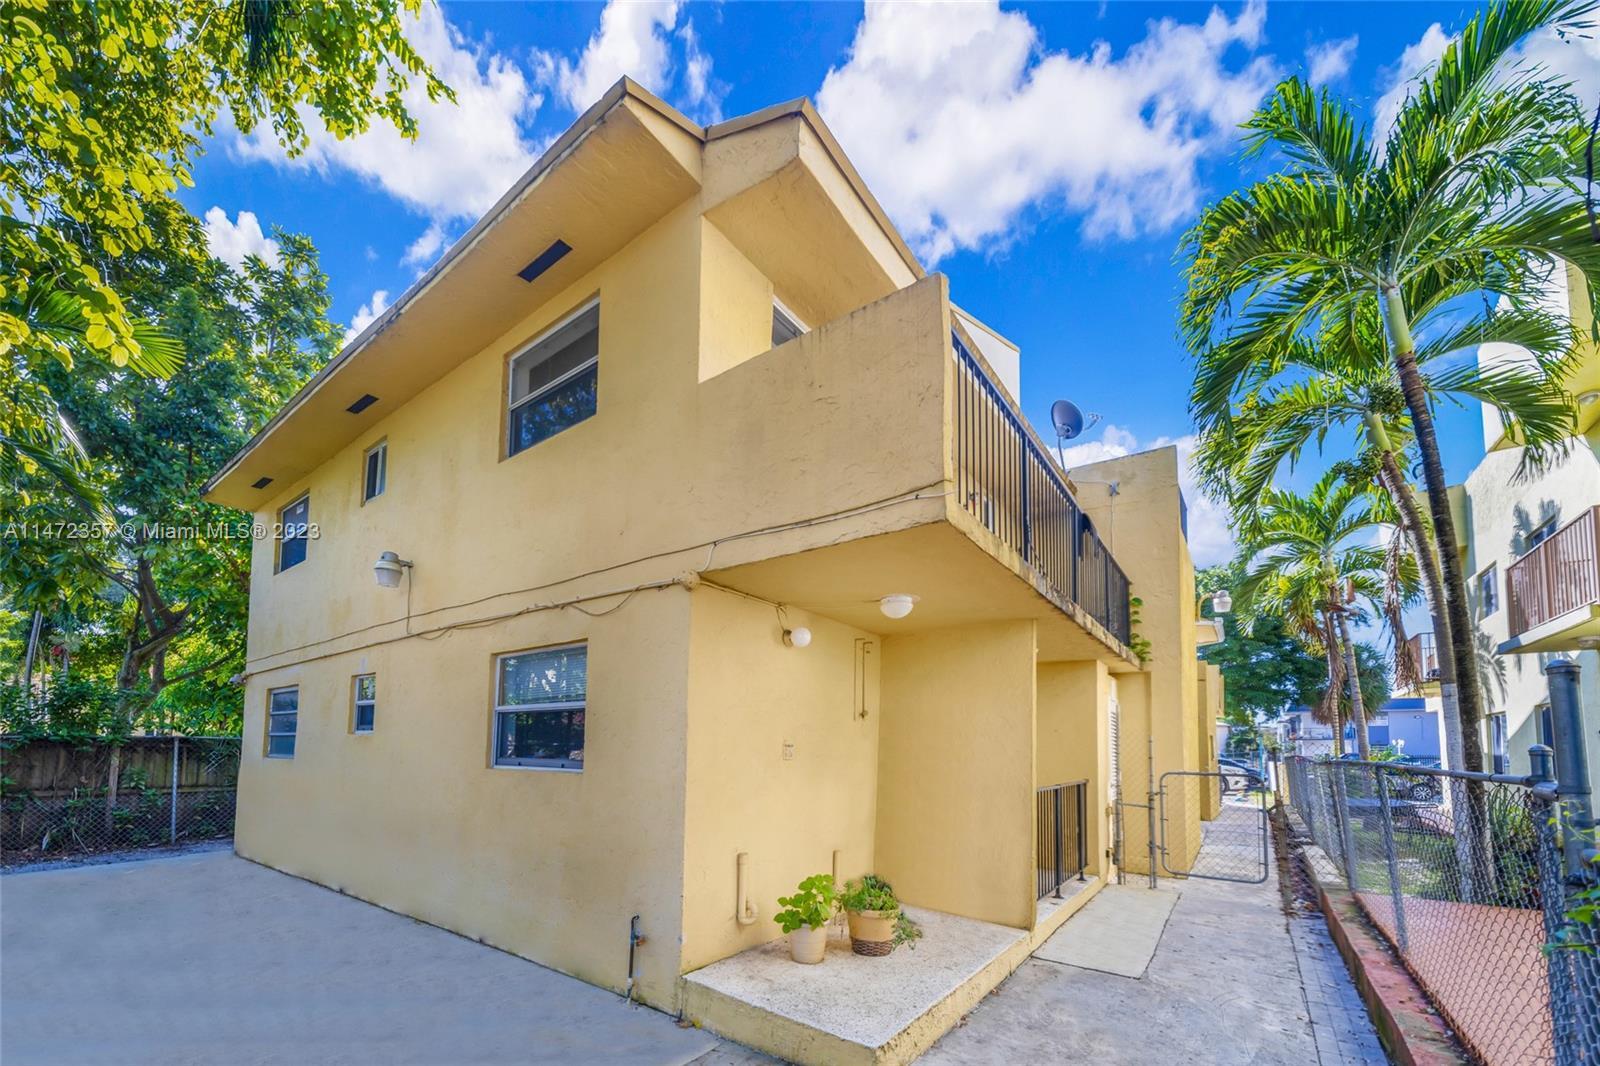 Photo of 1137 NW 2nd St in Miami, FL